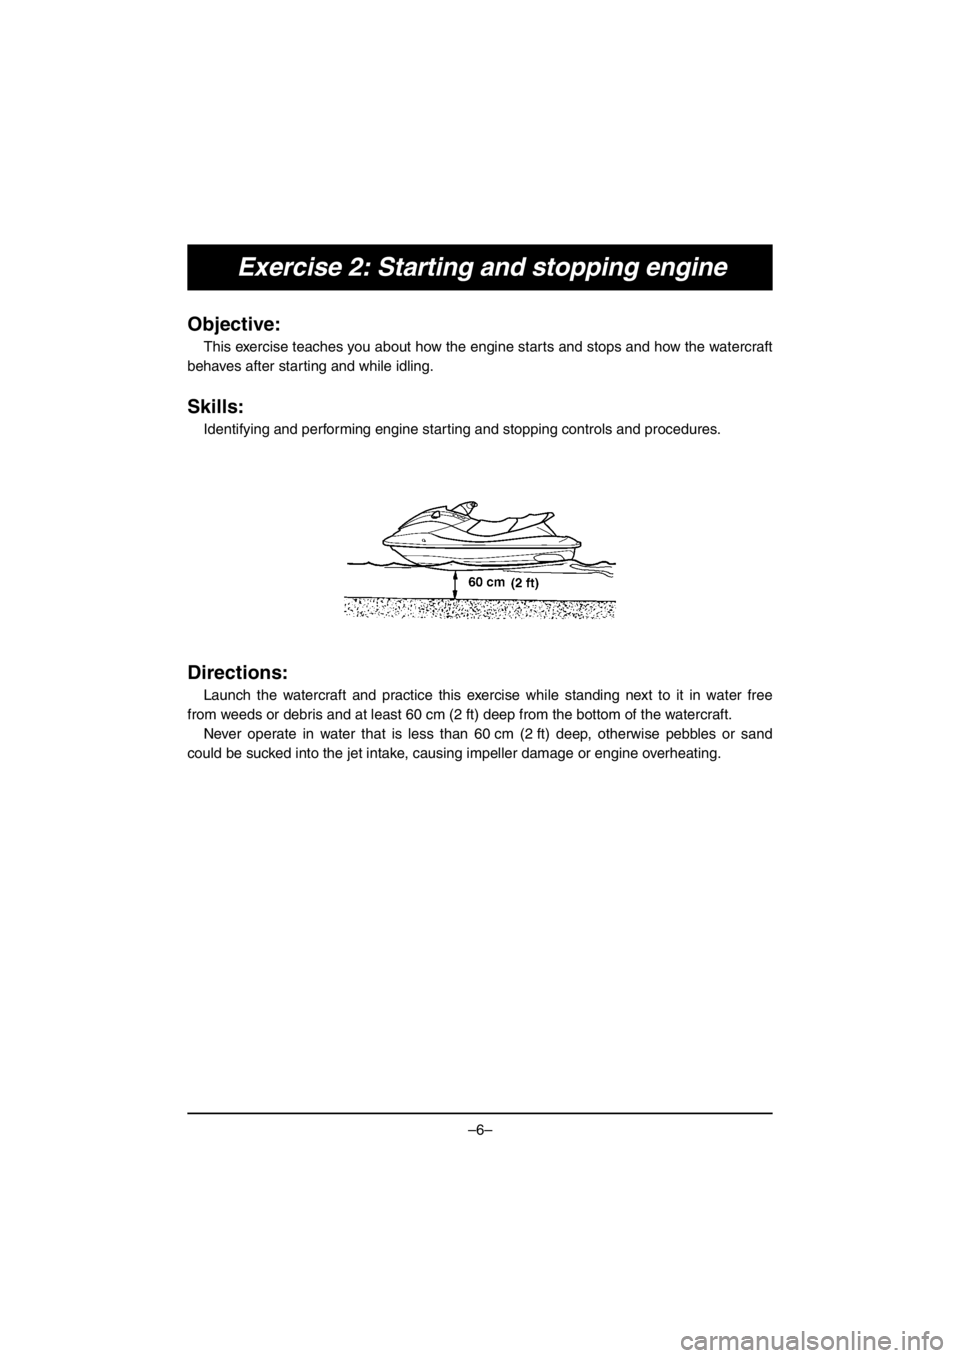 YAMAHA V1 2016 User Guide –6–
Exercise 2: Starting and stopping engine
Objective:
This exercise teaches you about how the engine starts and stops and how the watercraft
behaves after starting and while idling.
Skills:
Iden